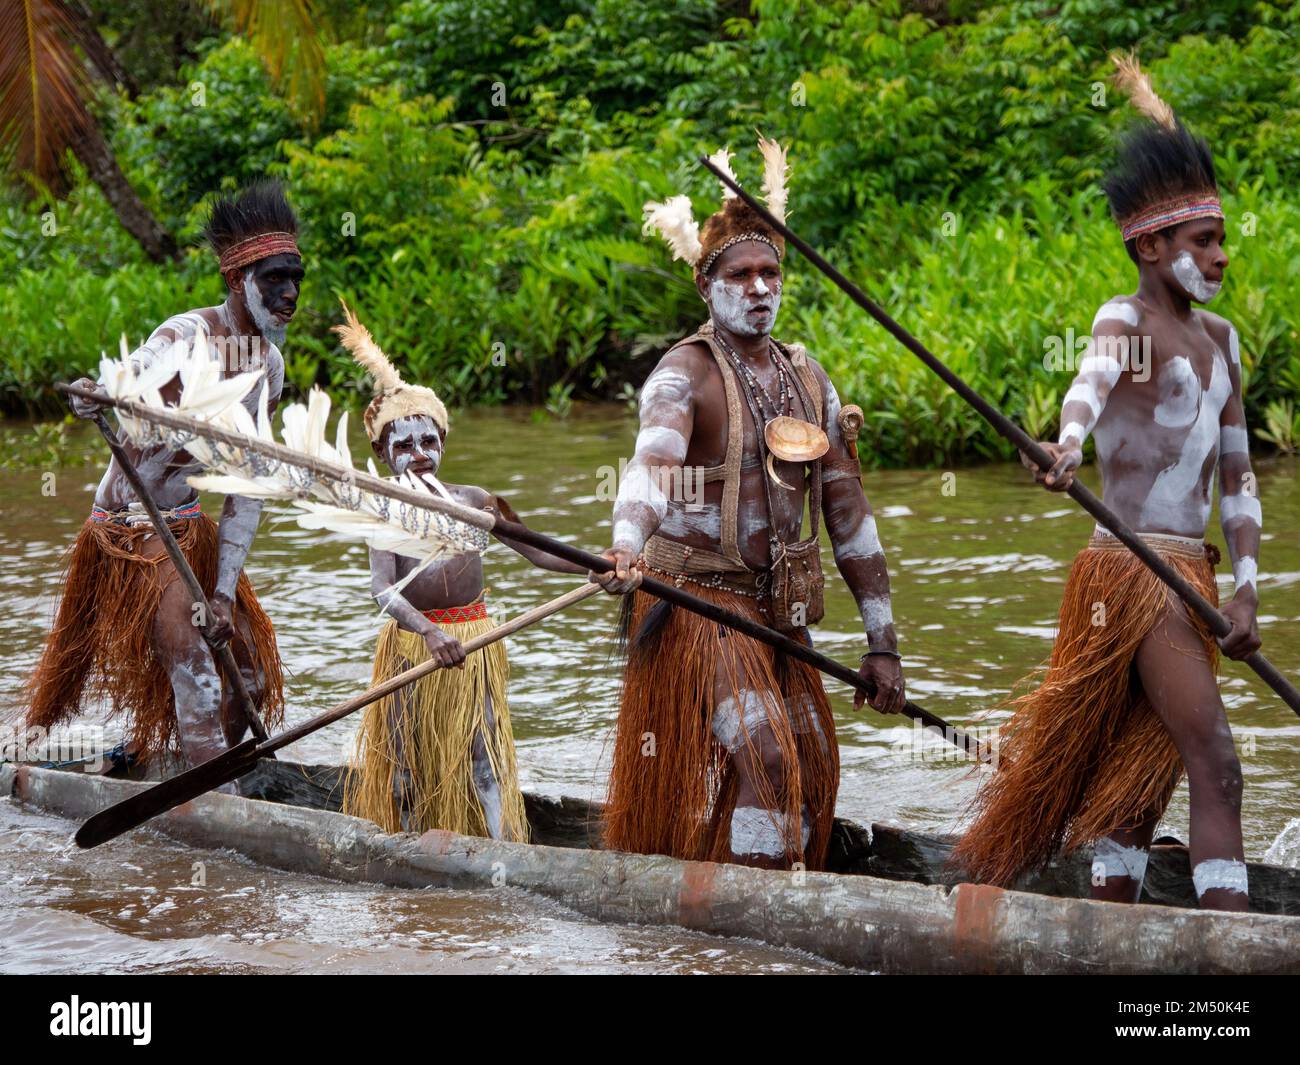 Canoe welcome to the Pem Village in the Asmat region of South Papua, Indonesia Stock Photo